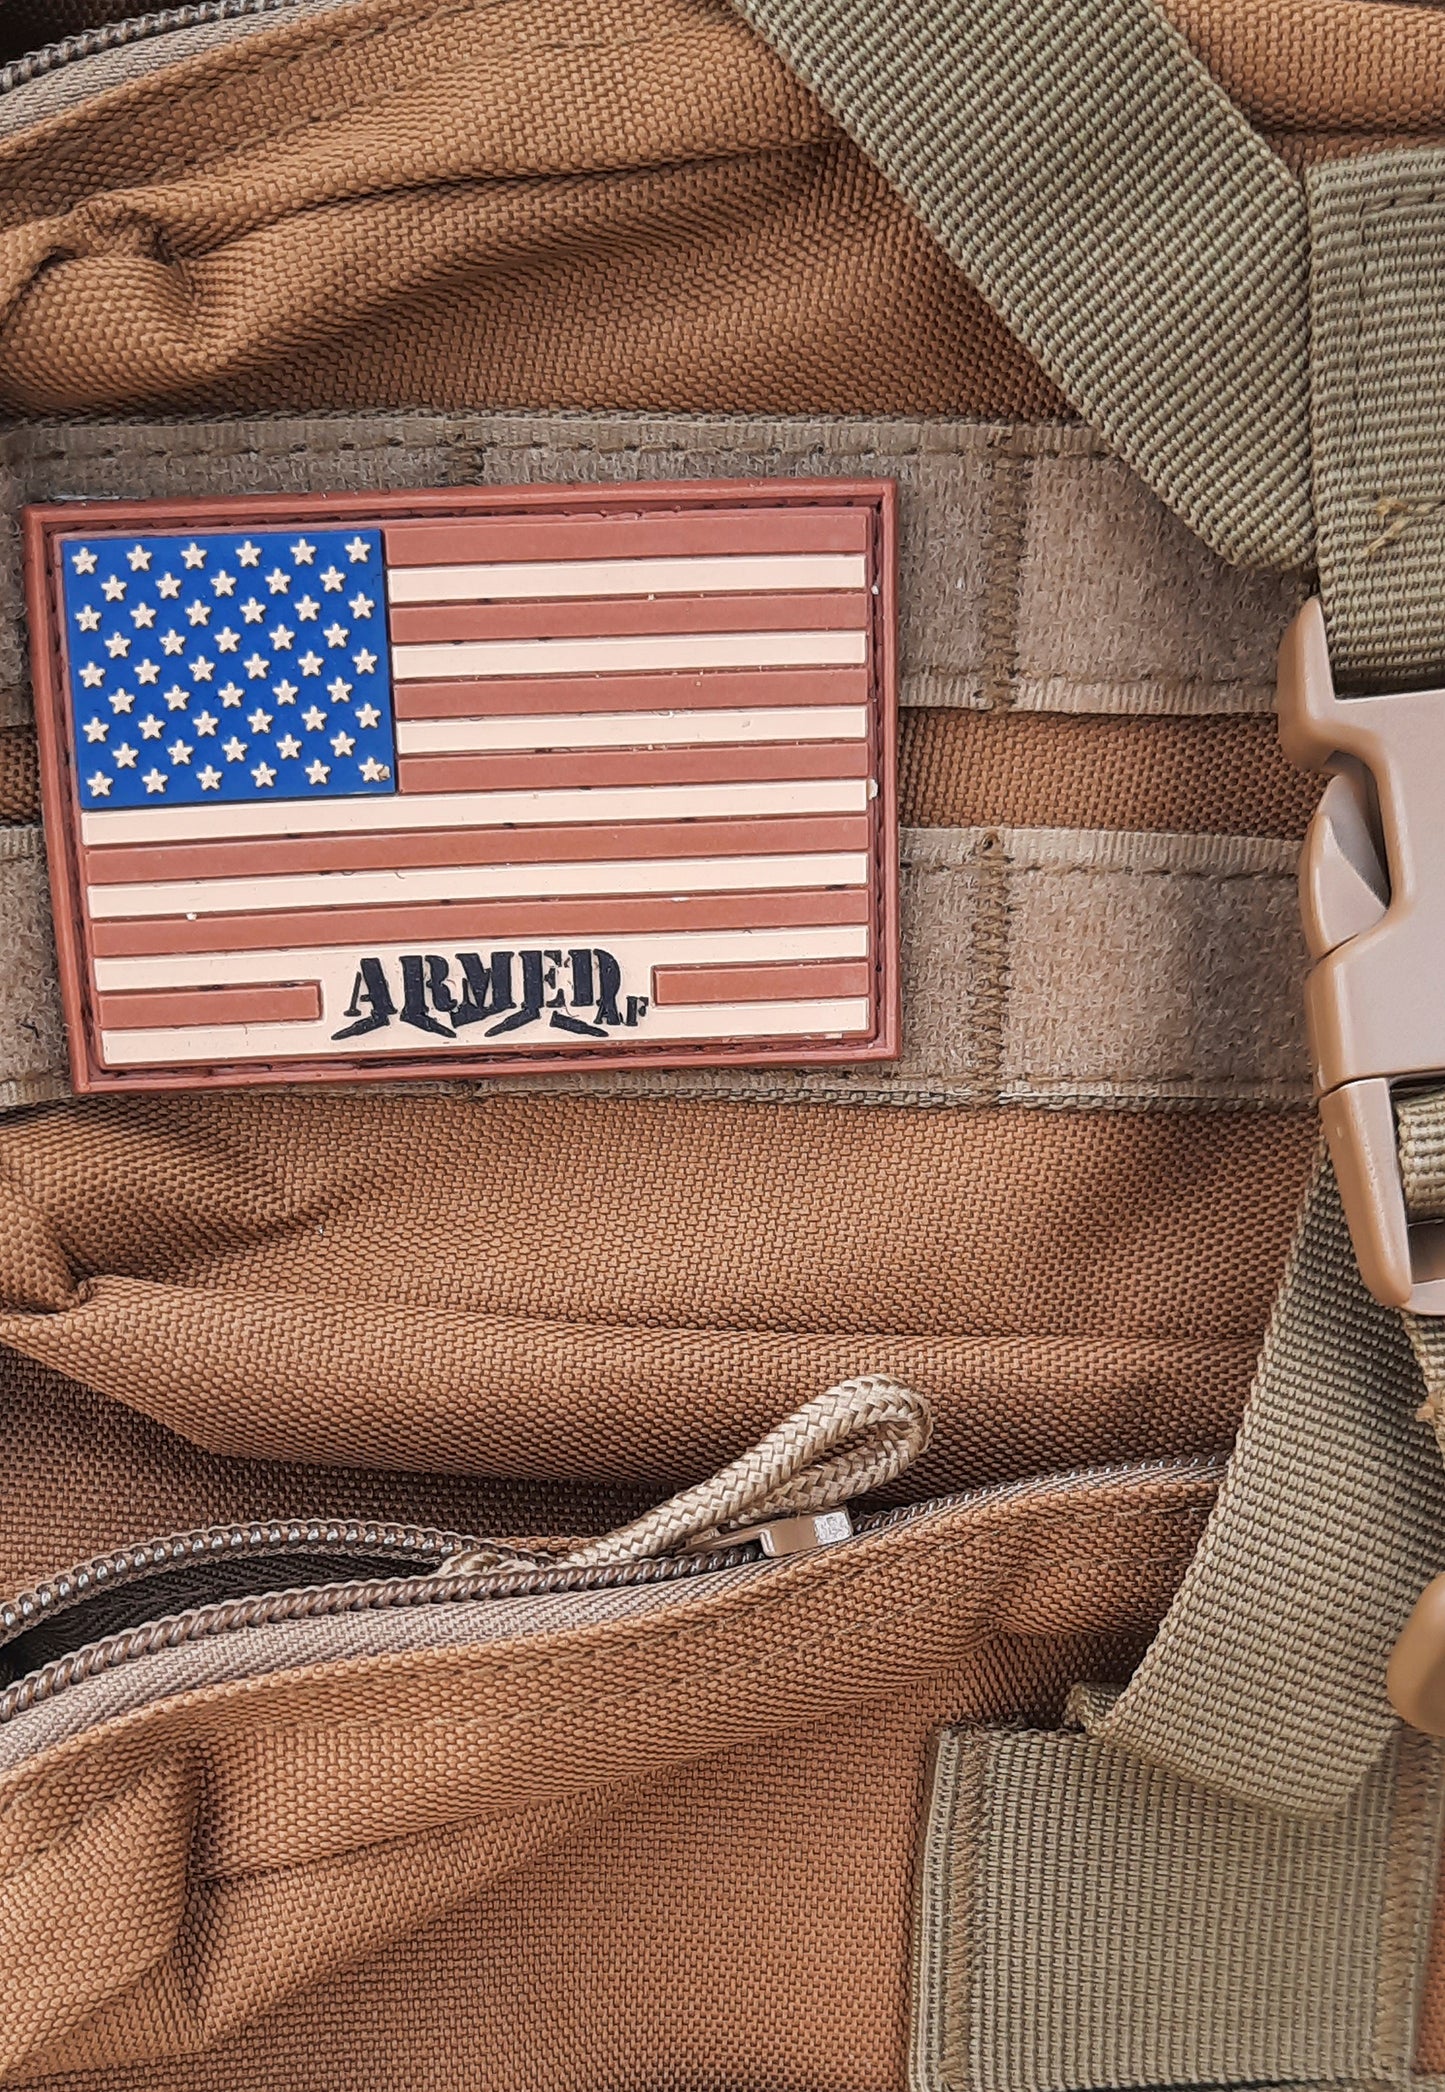 ArmedAF® patch on tactical backpack bugout bag